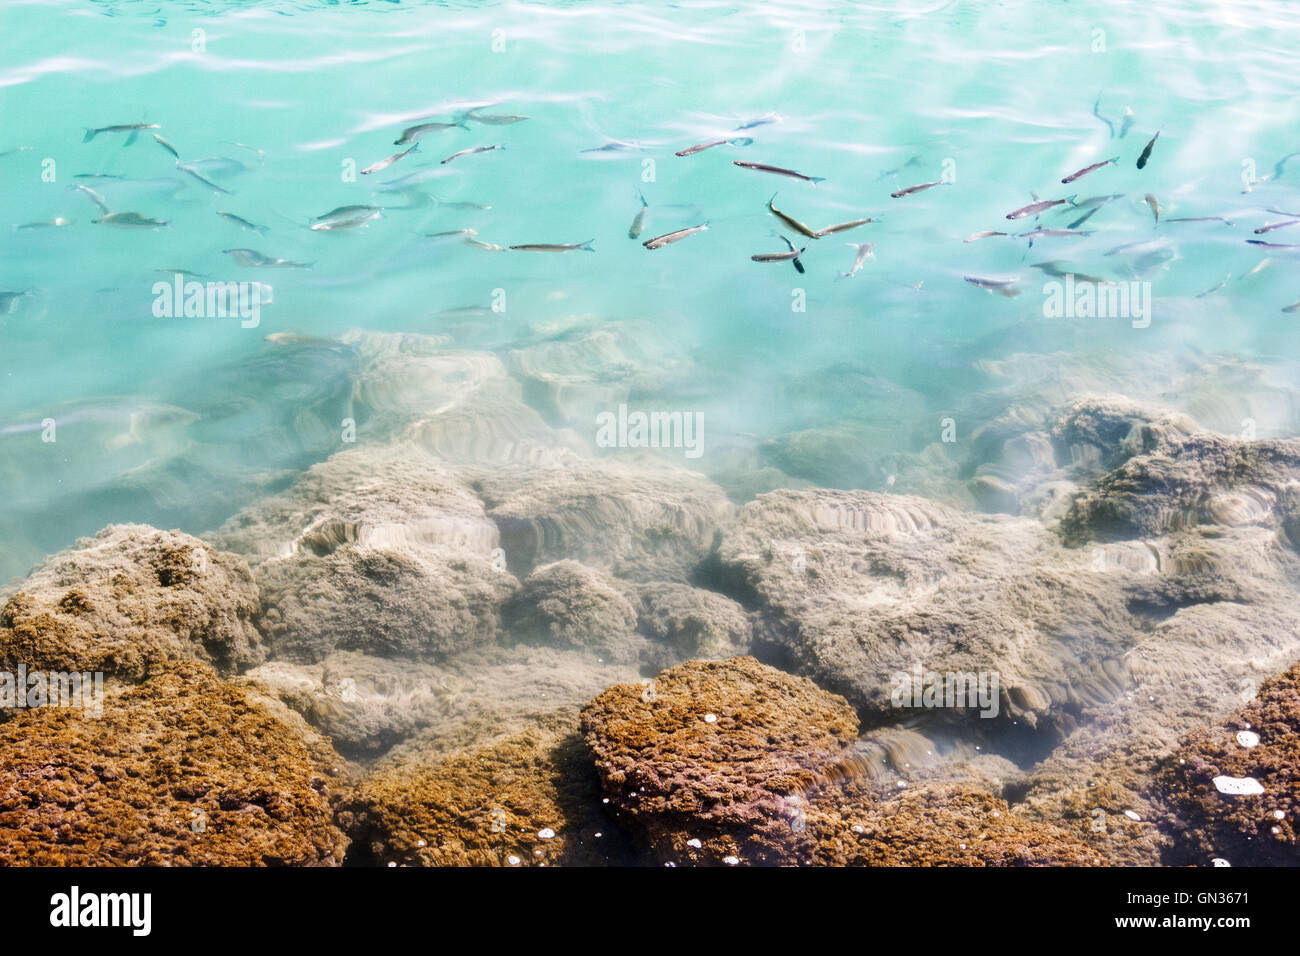 Many small fishes moving randomly in clear turquoise sea water near the underwater mossed stones. Stock Photo